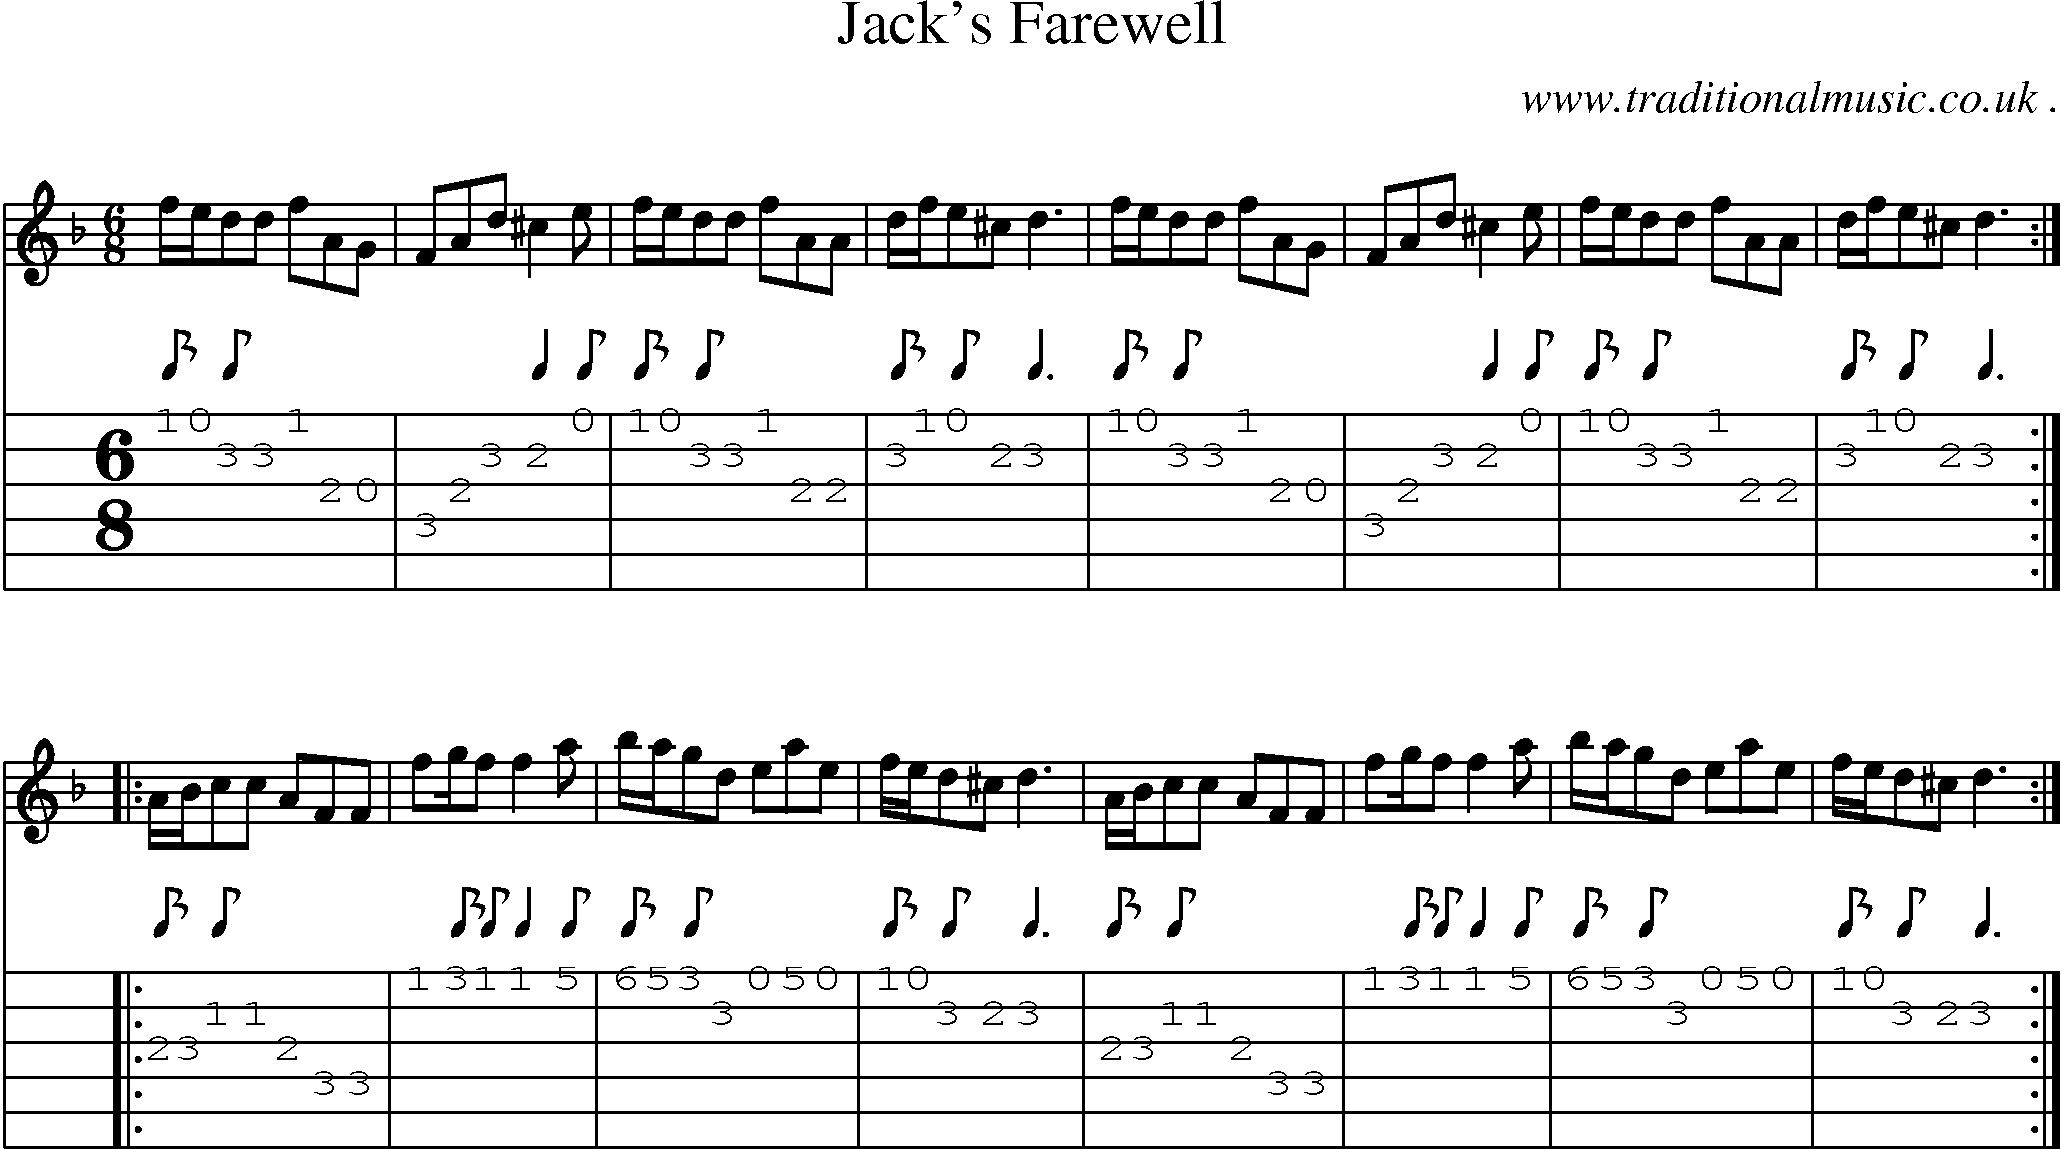 Sheet-Music and Guitar Tabs for Jacks Farewell